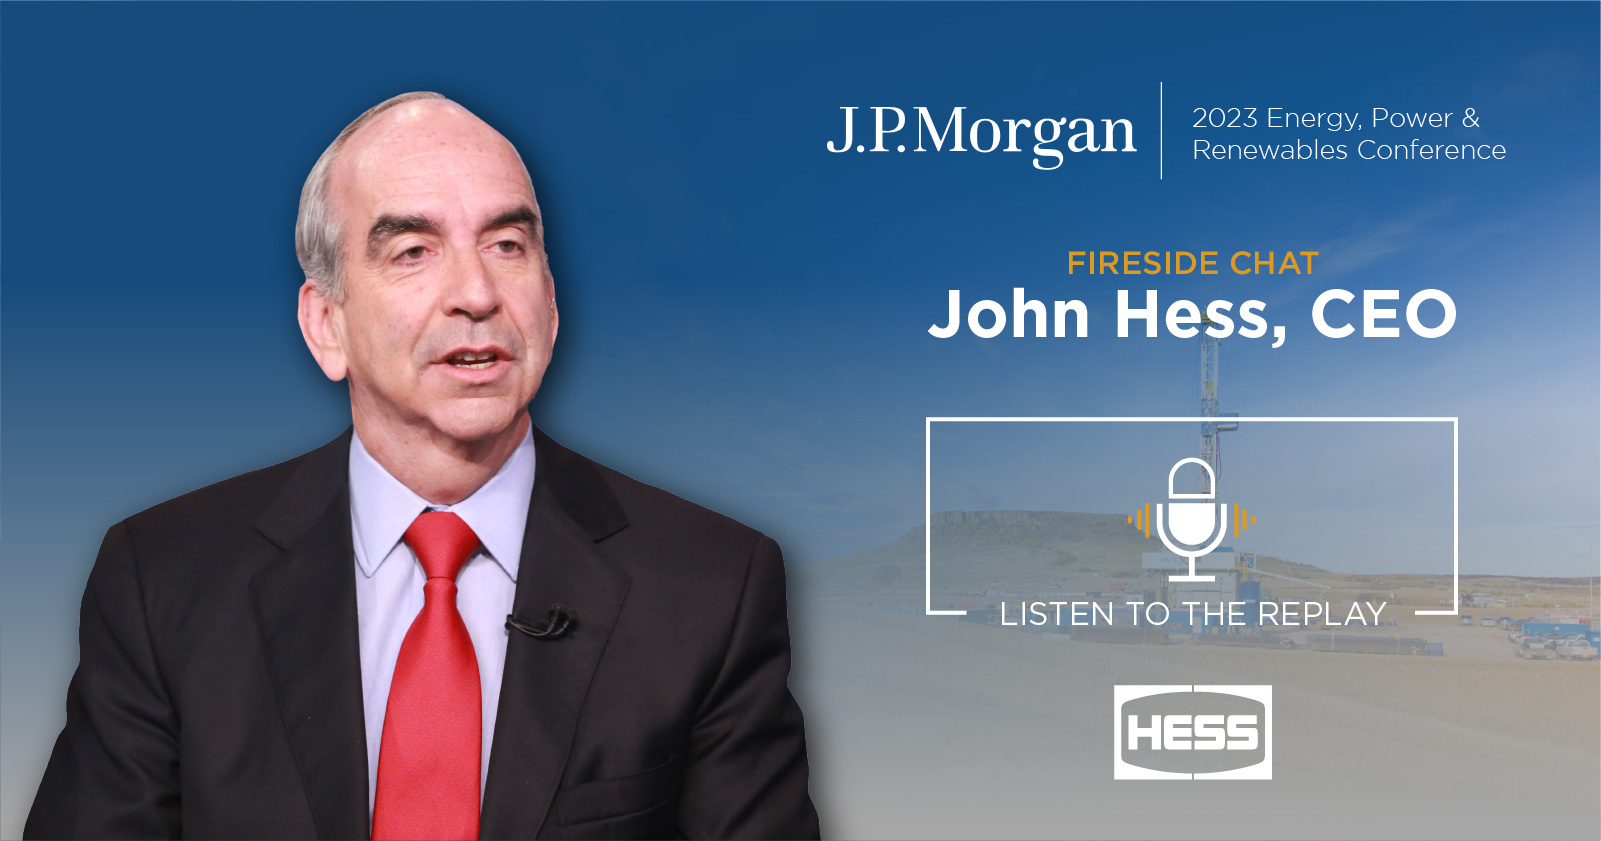 Hess Participates in J.P. Morgan 2023 Energy, Power and Renewables Conference